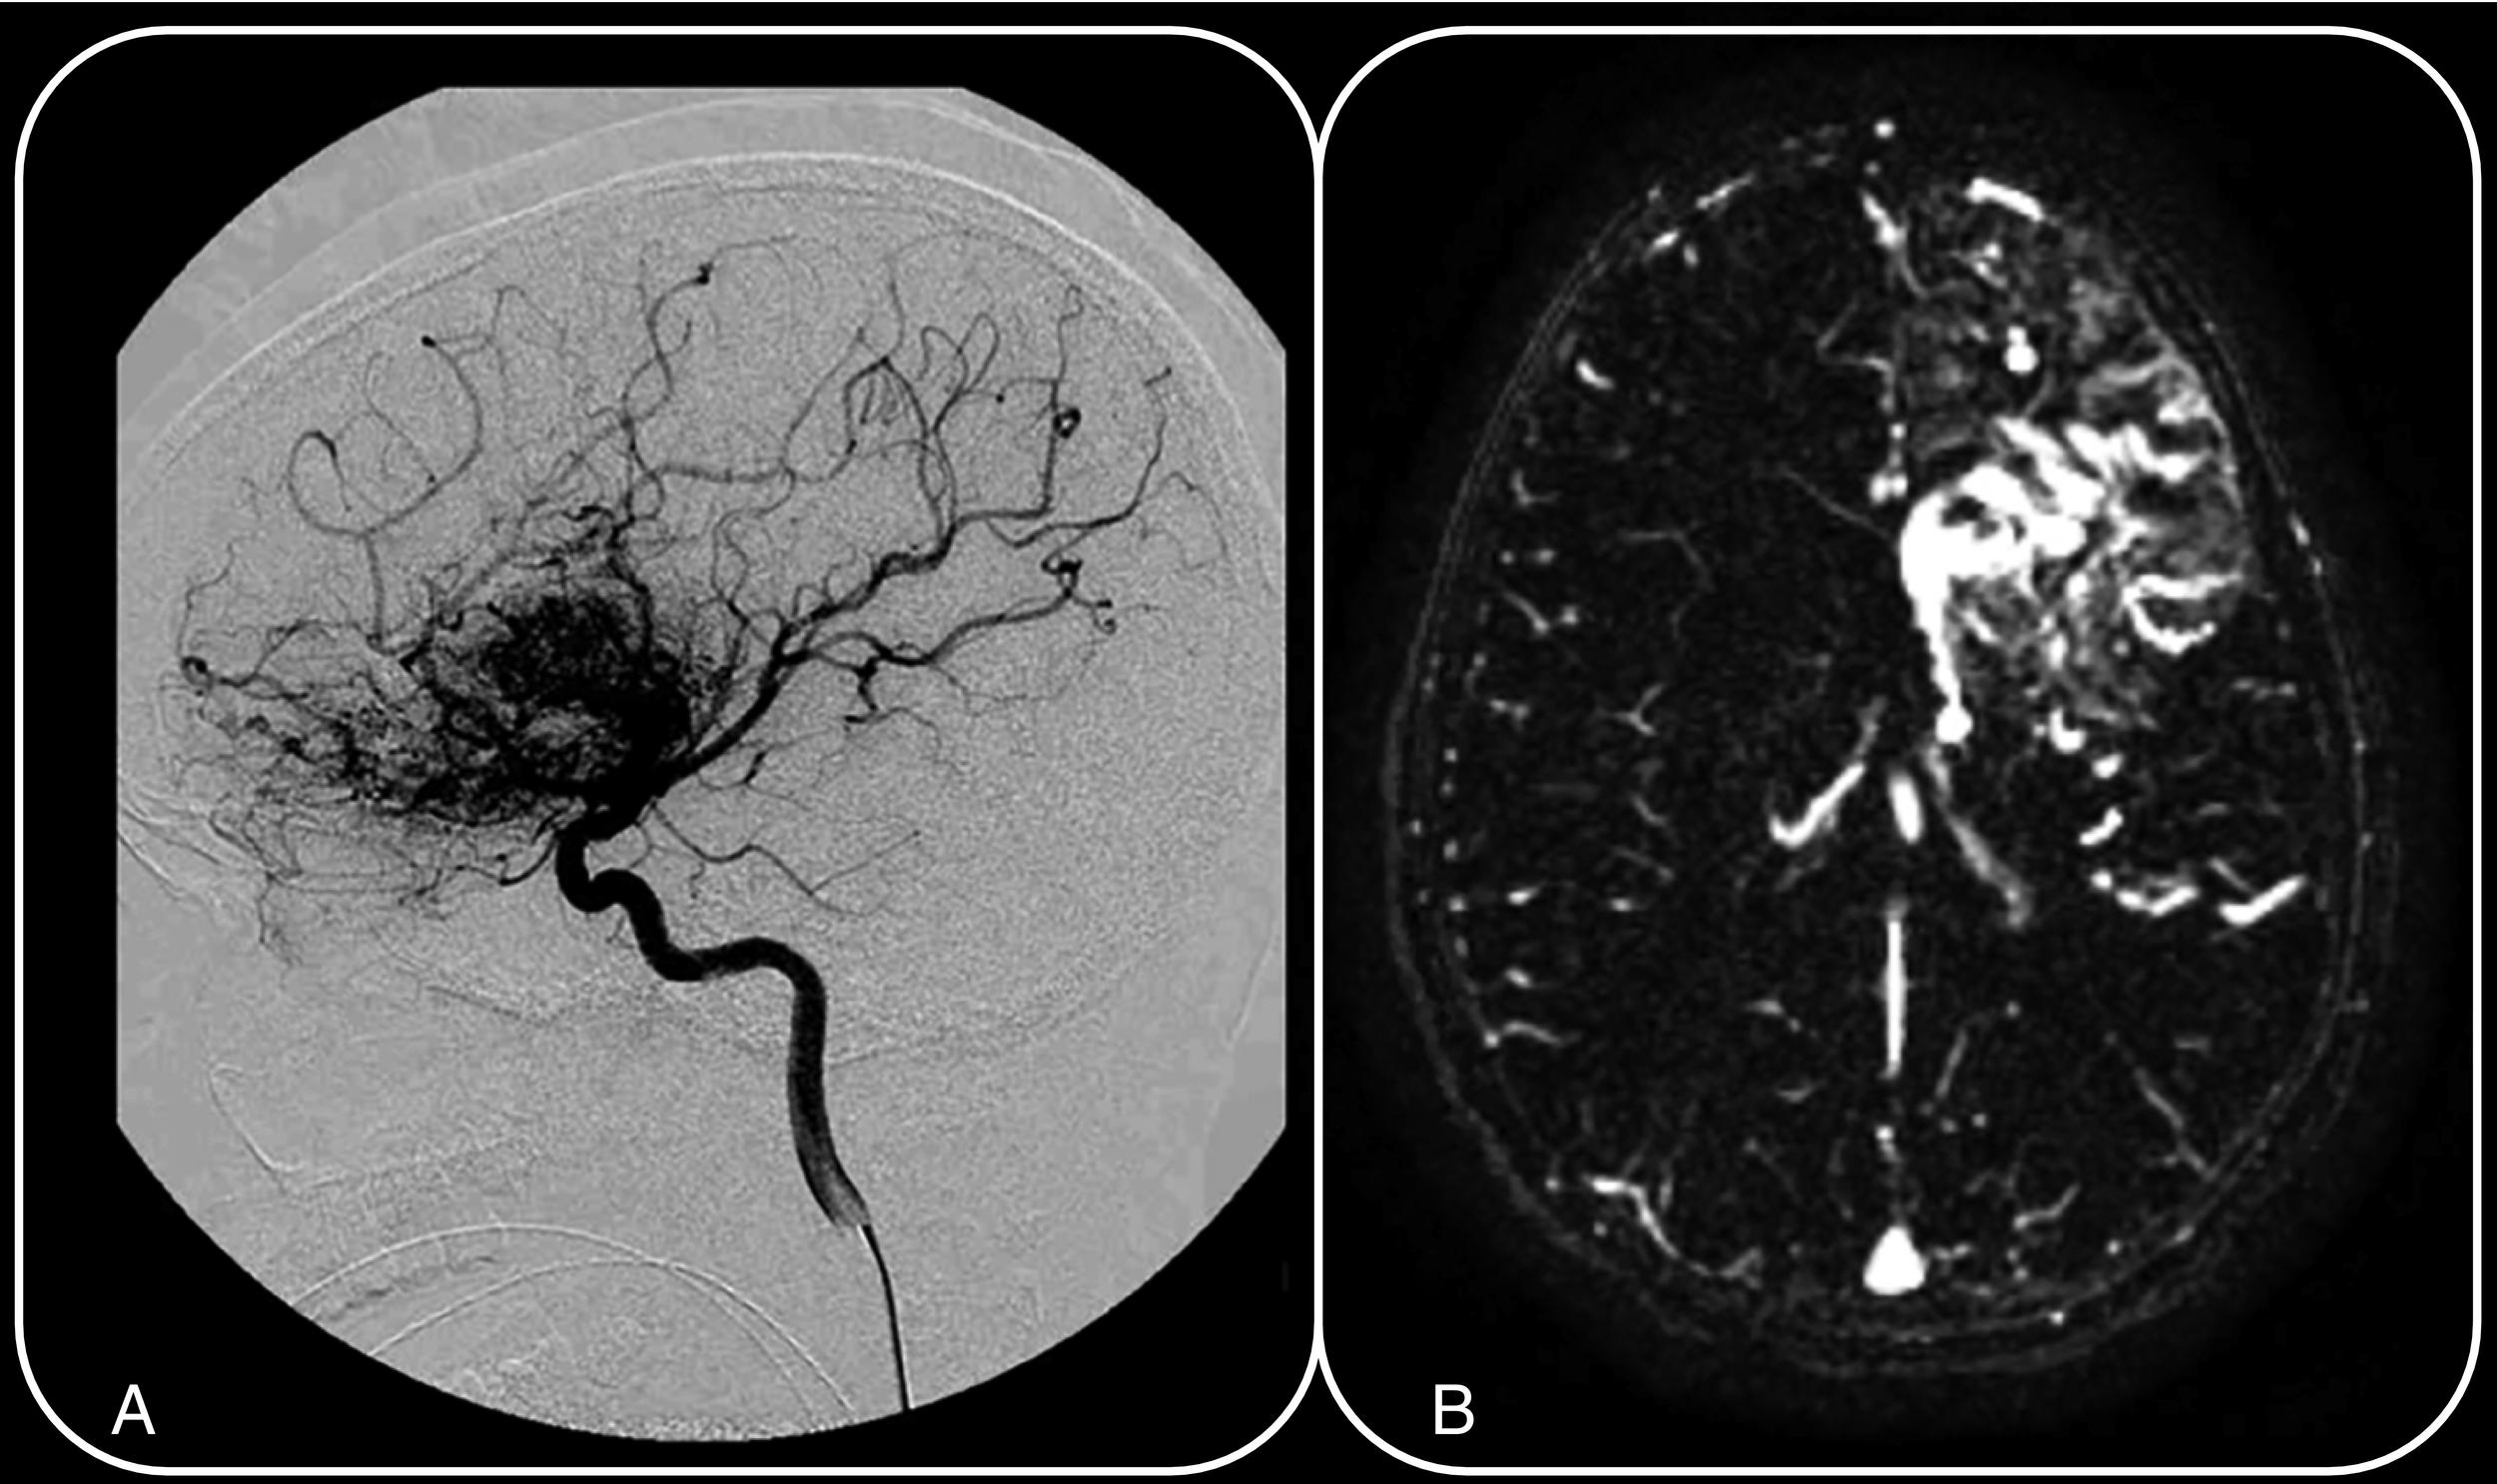 Fig. 3.6, A 10-year-old girl presents with generalized tonic-clonic seizures. Left internal carotid artery injection lateral digital subtraction angiography projection ( A ) and axial subtraction TRICKS MR angiography sequence ( B ) confirm the presence of a large left frontal lobar vascular malformation with an ill-defined nidus measuring up to 6.9 cm and evidence of normal parenchyma interspersed throughout the nidus, supplied by multiple small arterial feeding branches without dominant arterial feeder or evidence of high-flow arteriovenous shunting. Overall imaging characteristics favor a diagnosis of cerebral proliferative angiopathy.